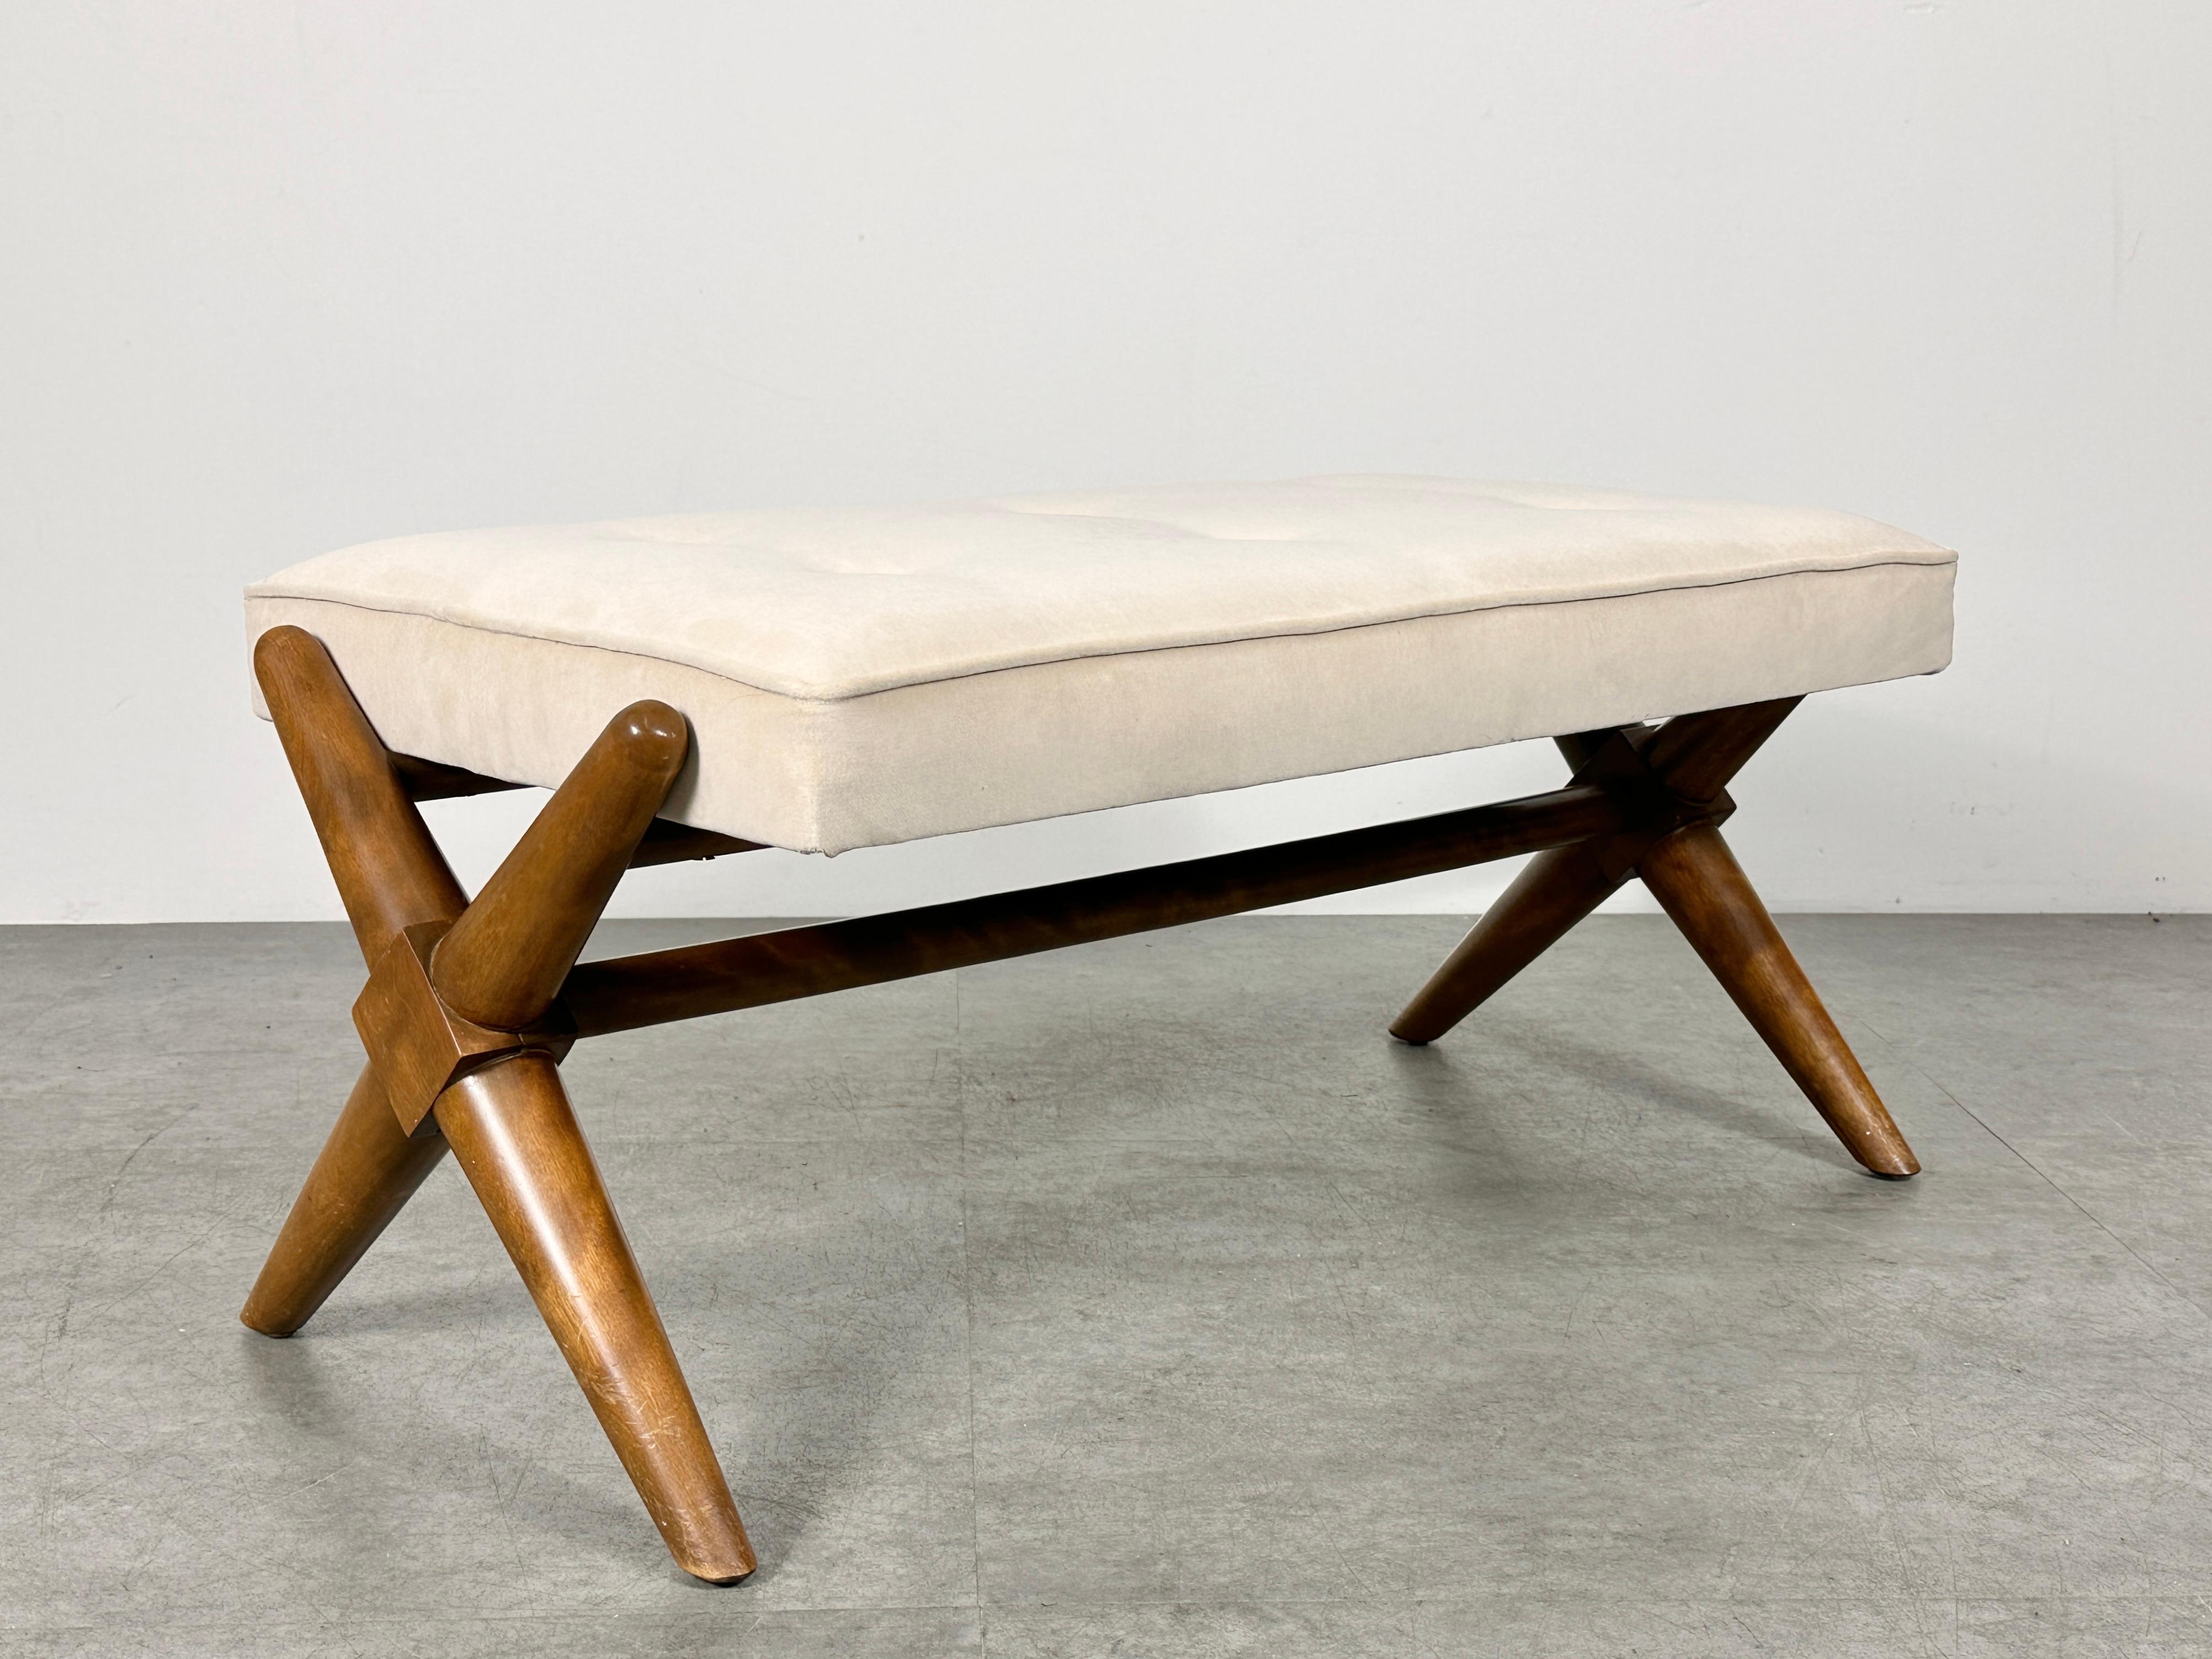 X Base bench by TH Robsjohn Gibbings for Widdicomb circa 1950s

Rectangular tufted seat newly upholstered in an Ivory matte velour
Flanked on each side by a sculptural X form base in solid Maple

33.75